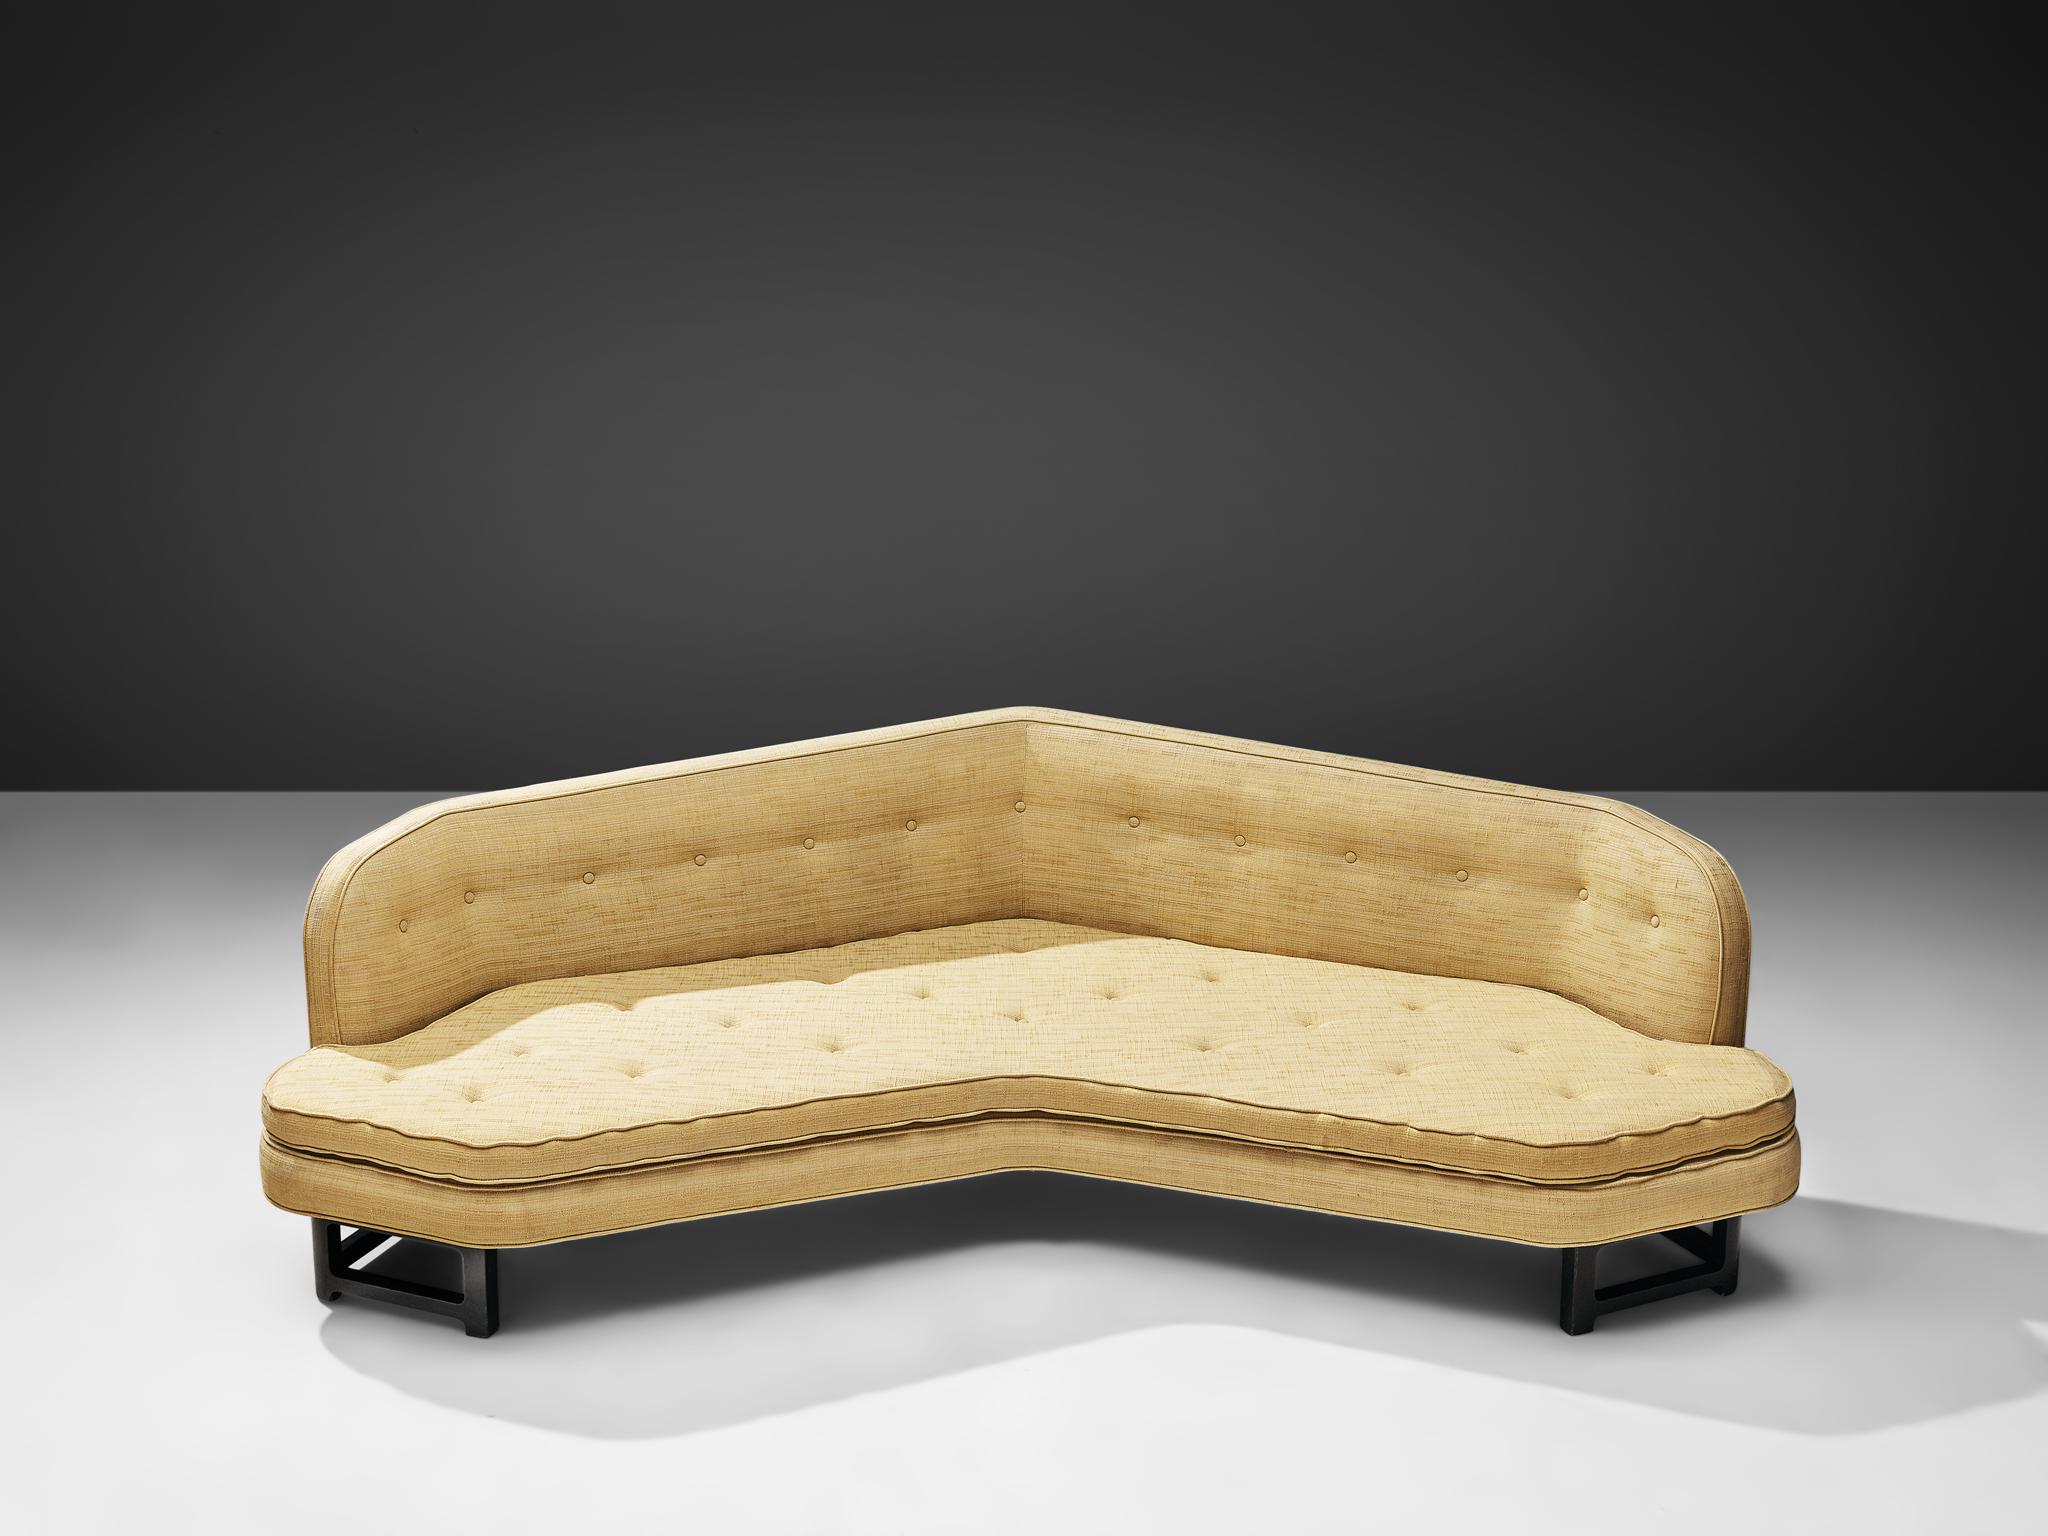 Edward Wormley for Dunbar, Janus sofa, cream fabric, mahogany, United States, 1960s.

Wide angled 'Janus' sofa by Edward Wormley. This sofa has a modern shape and sinuous lines which create a comfortable and appealing look. The open structured